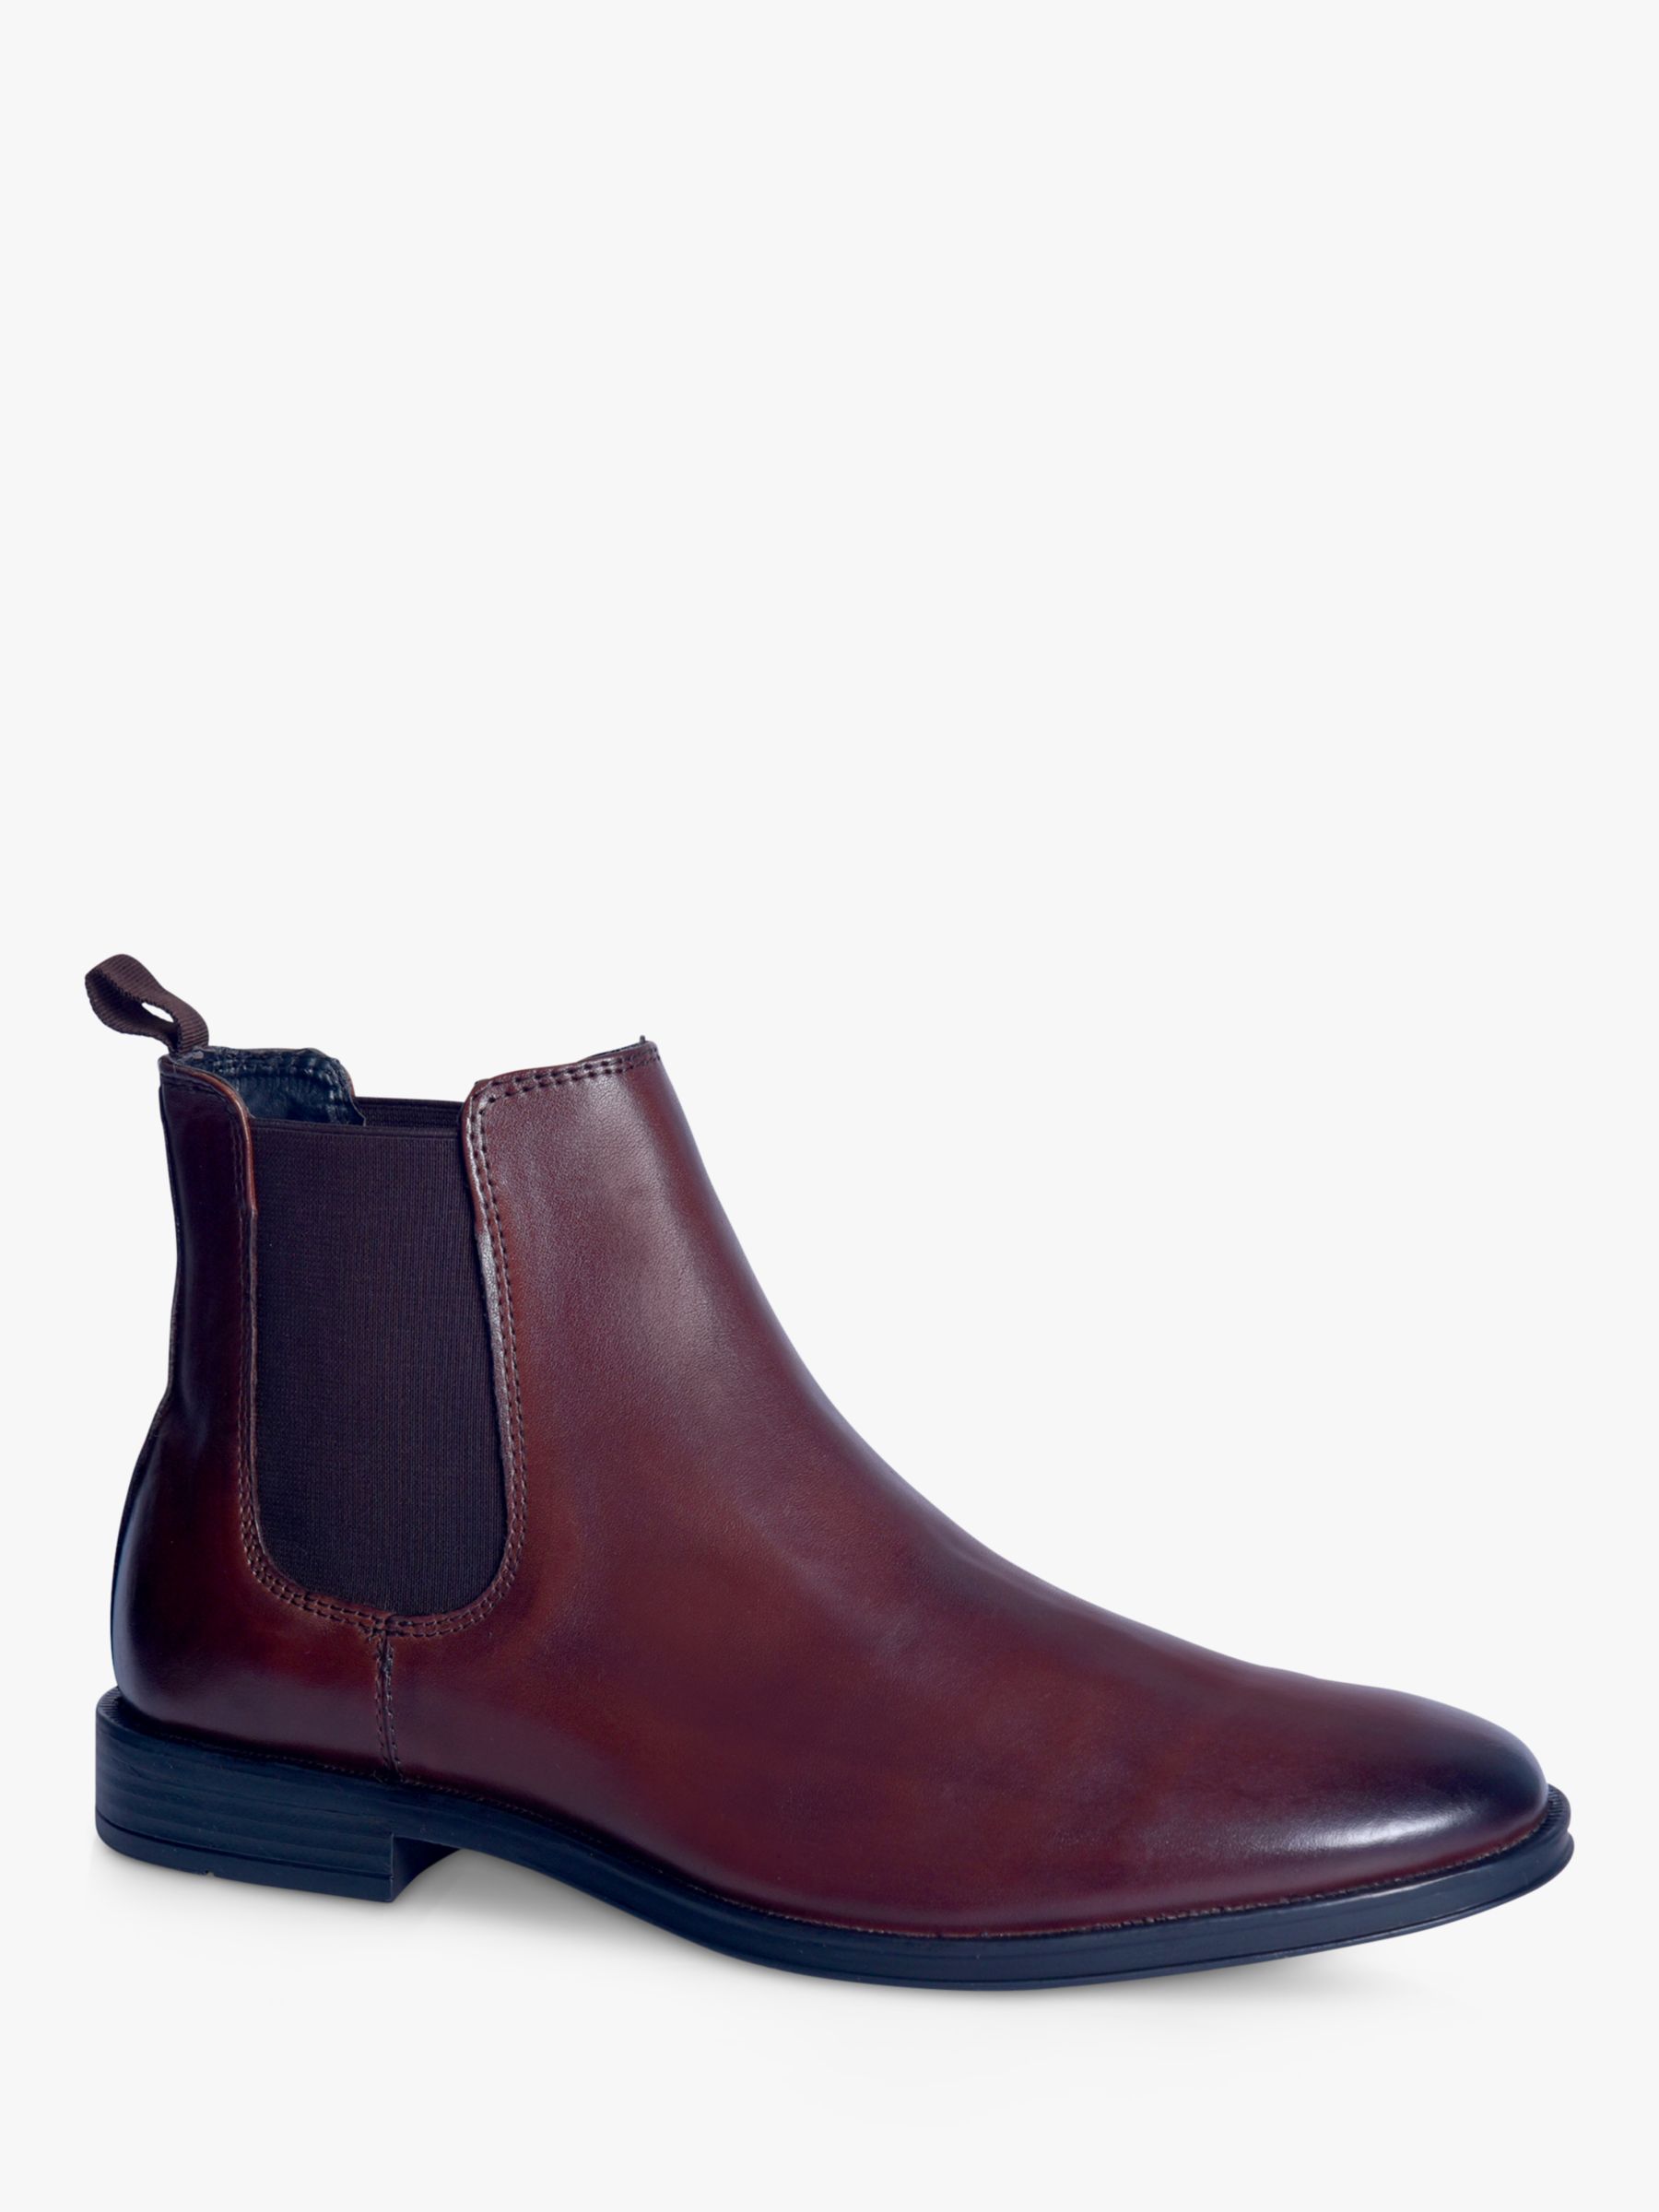 Silver Street London Islington Leather Chelsea Boots, Brown, 7